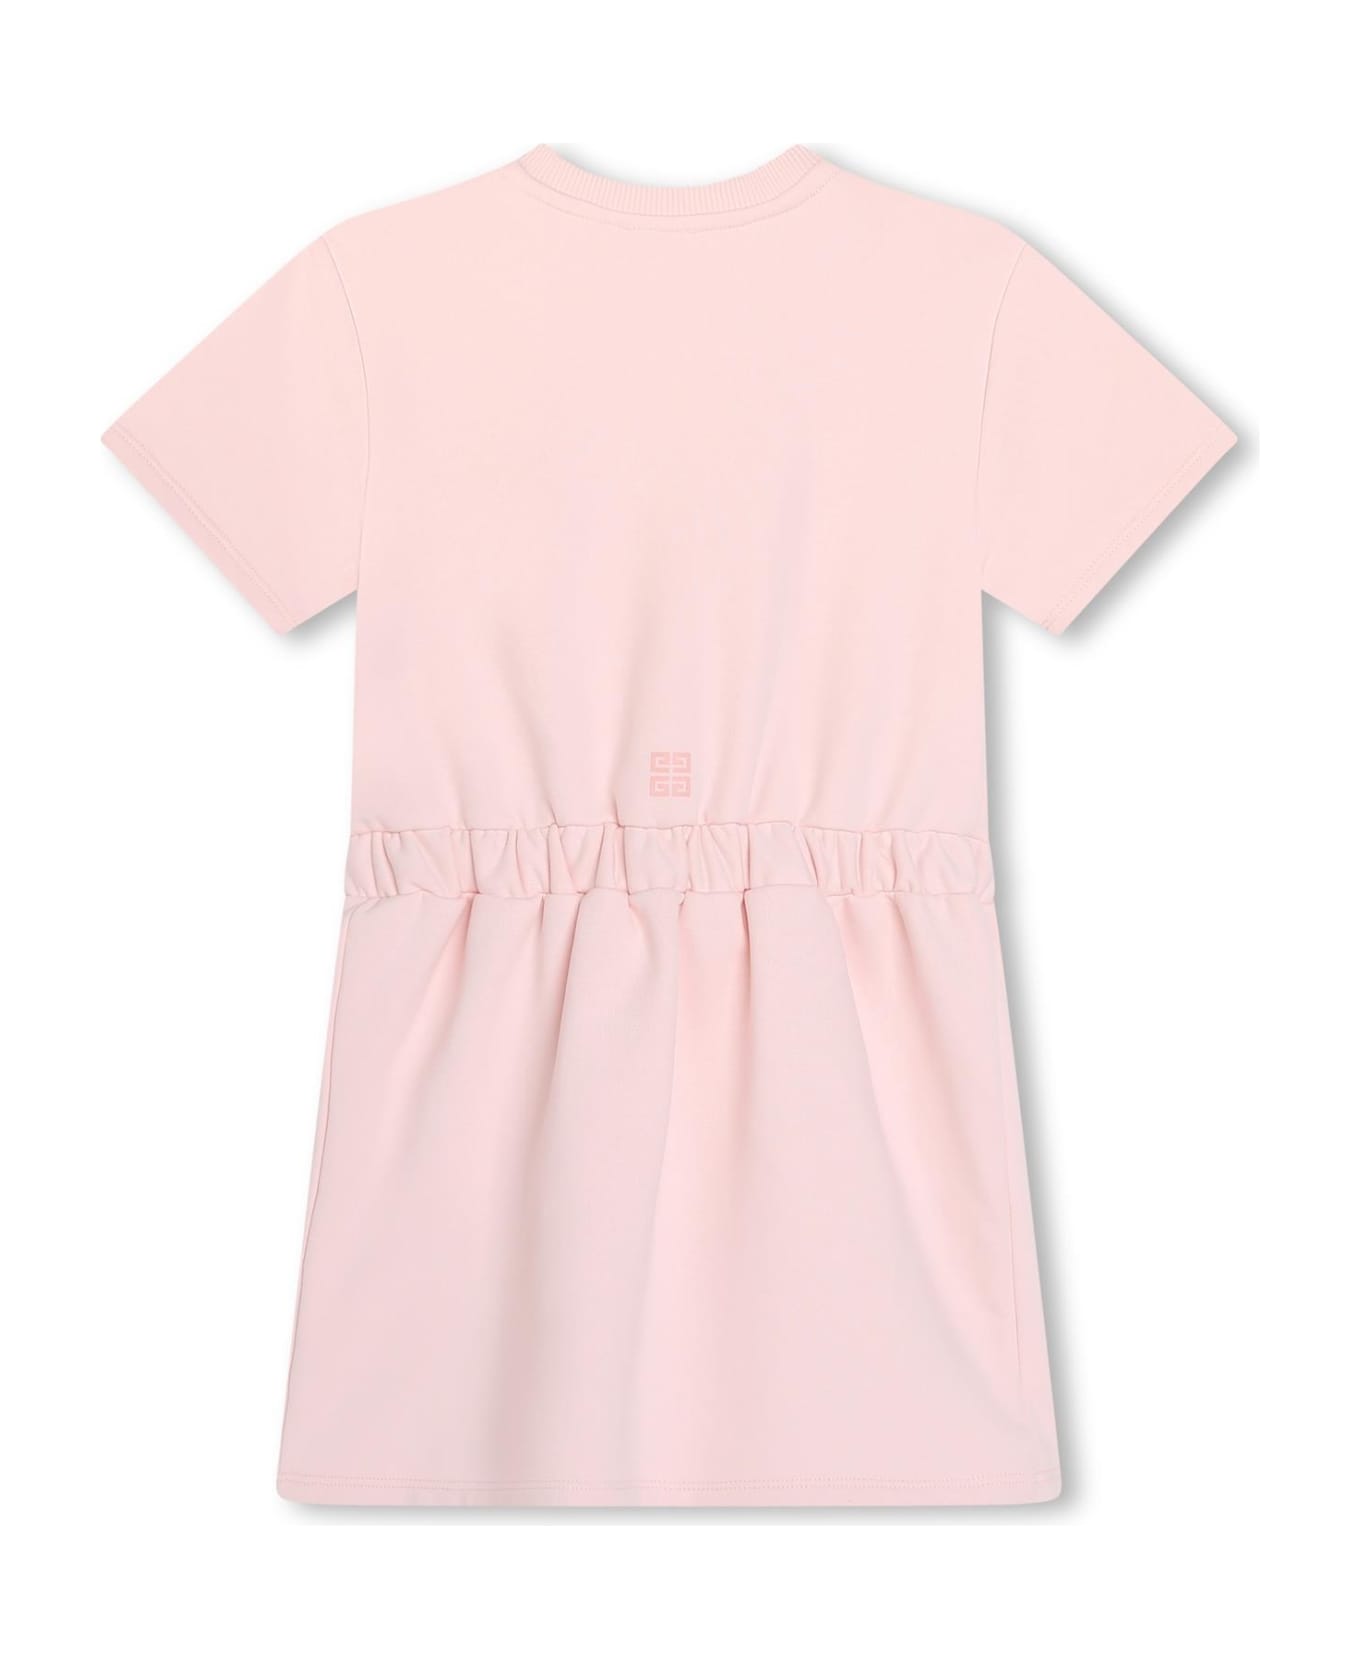 Givenchy Abito Con Stampa - Pink